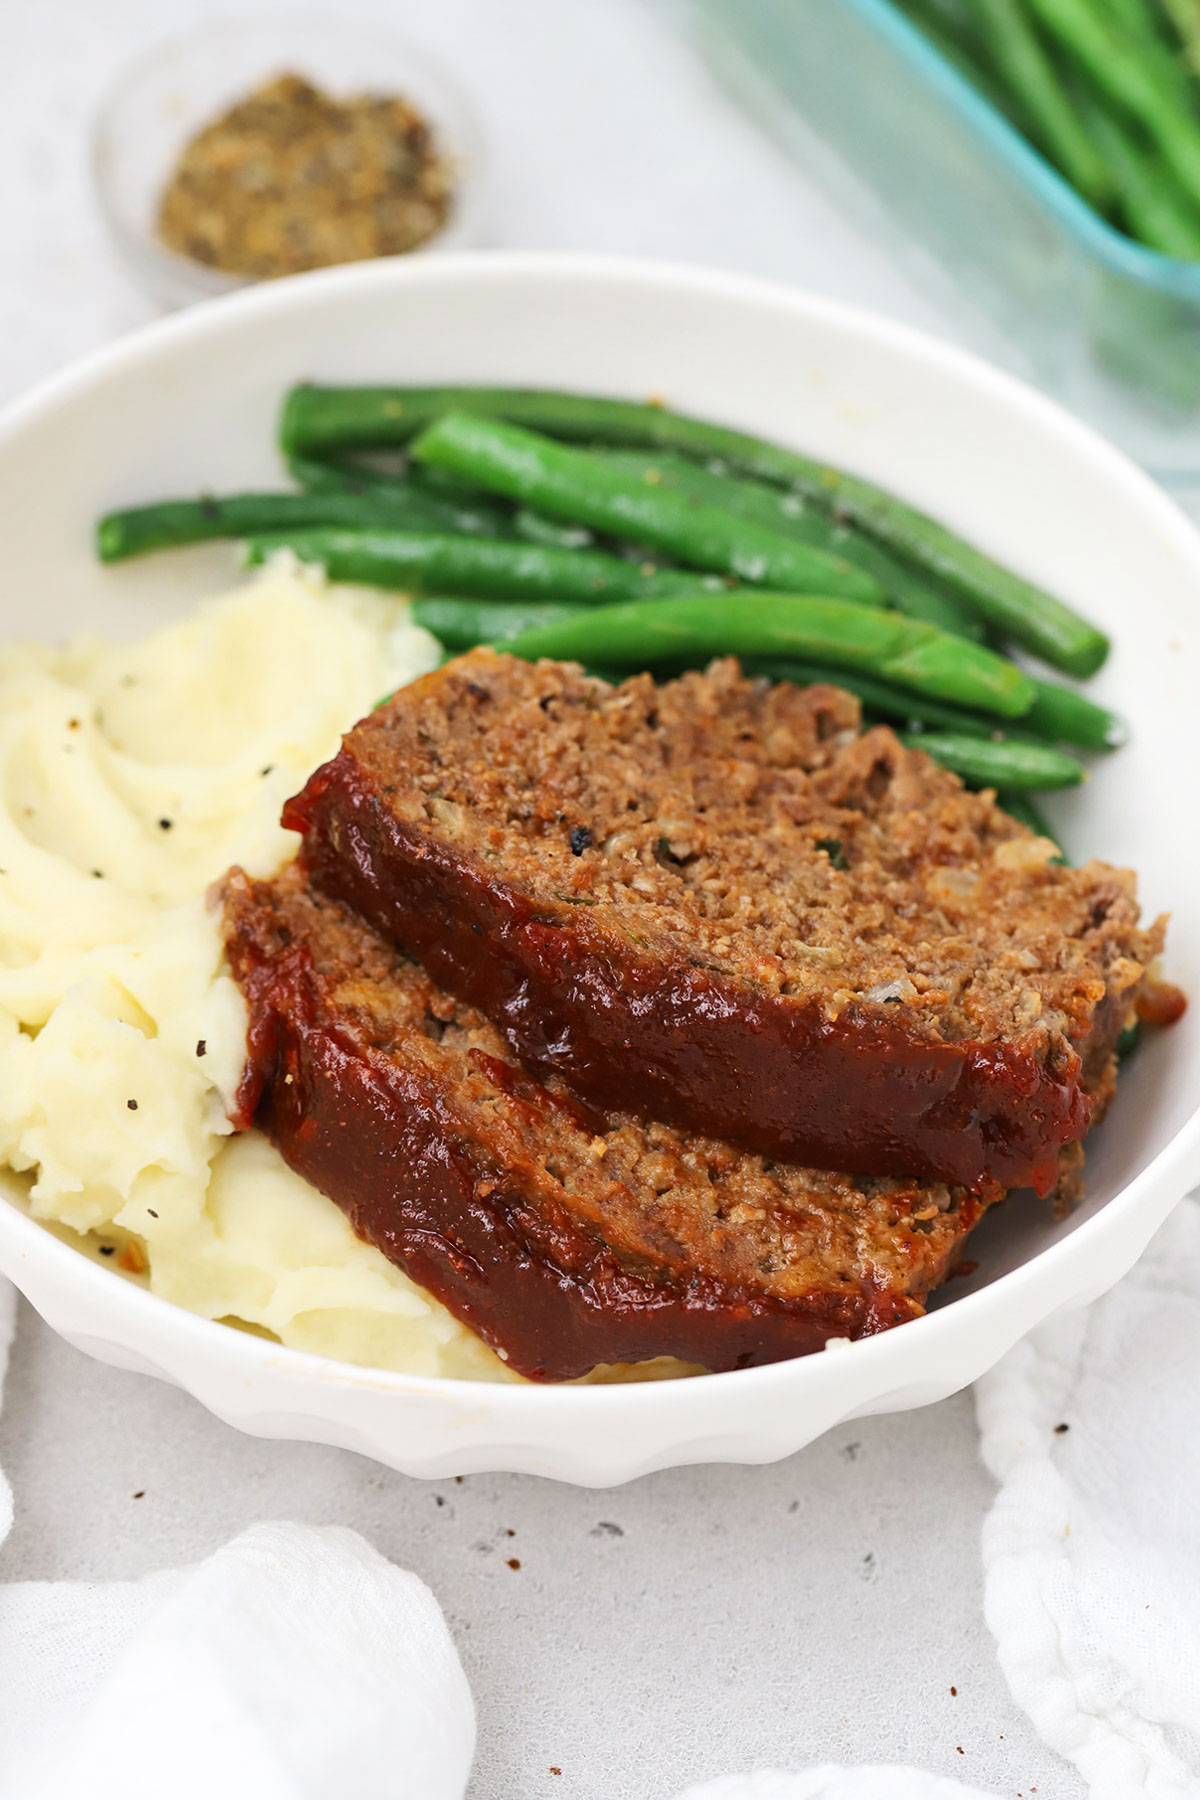 homemade meatloaf with mashed potatoes and green beans